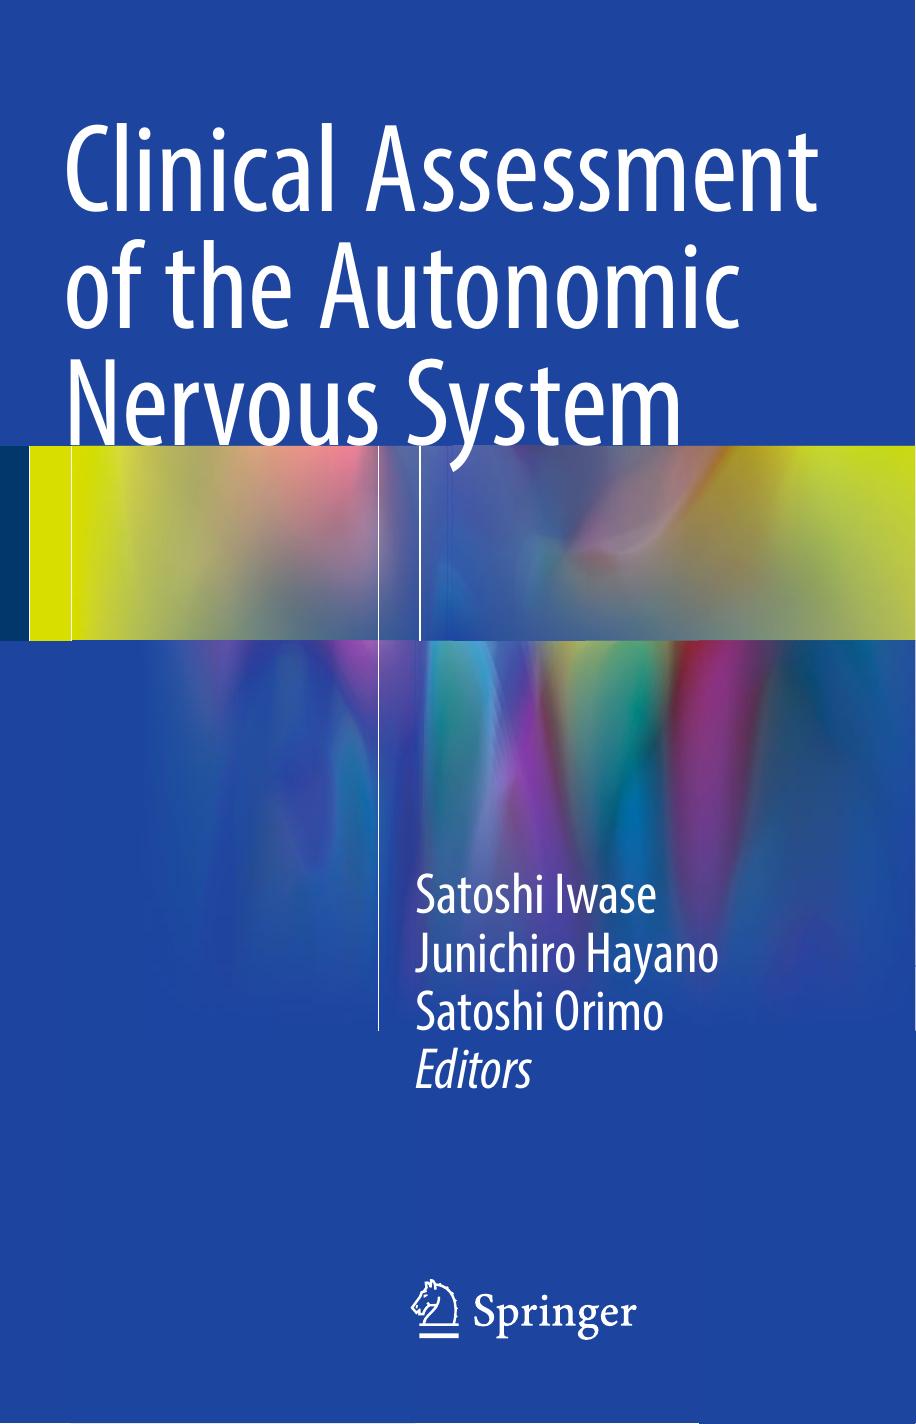 Clinical Assessment of the Autonomic Nervous System 2017